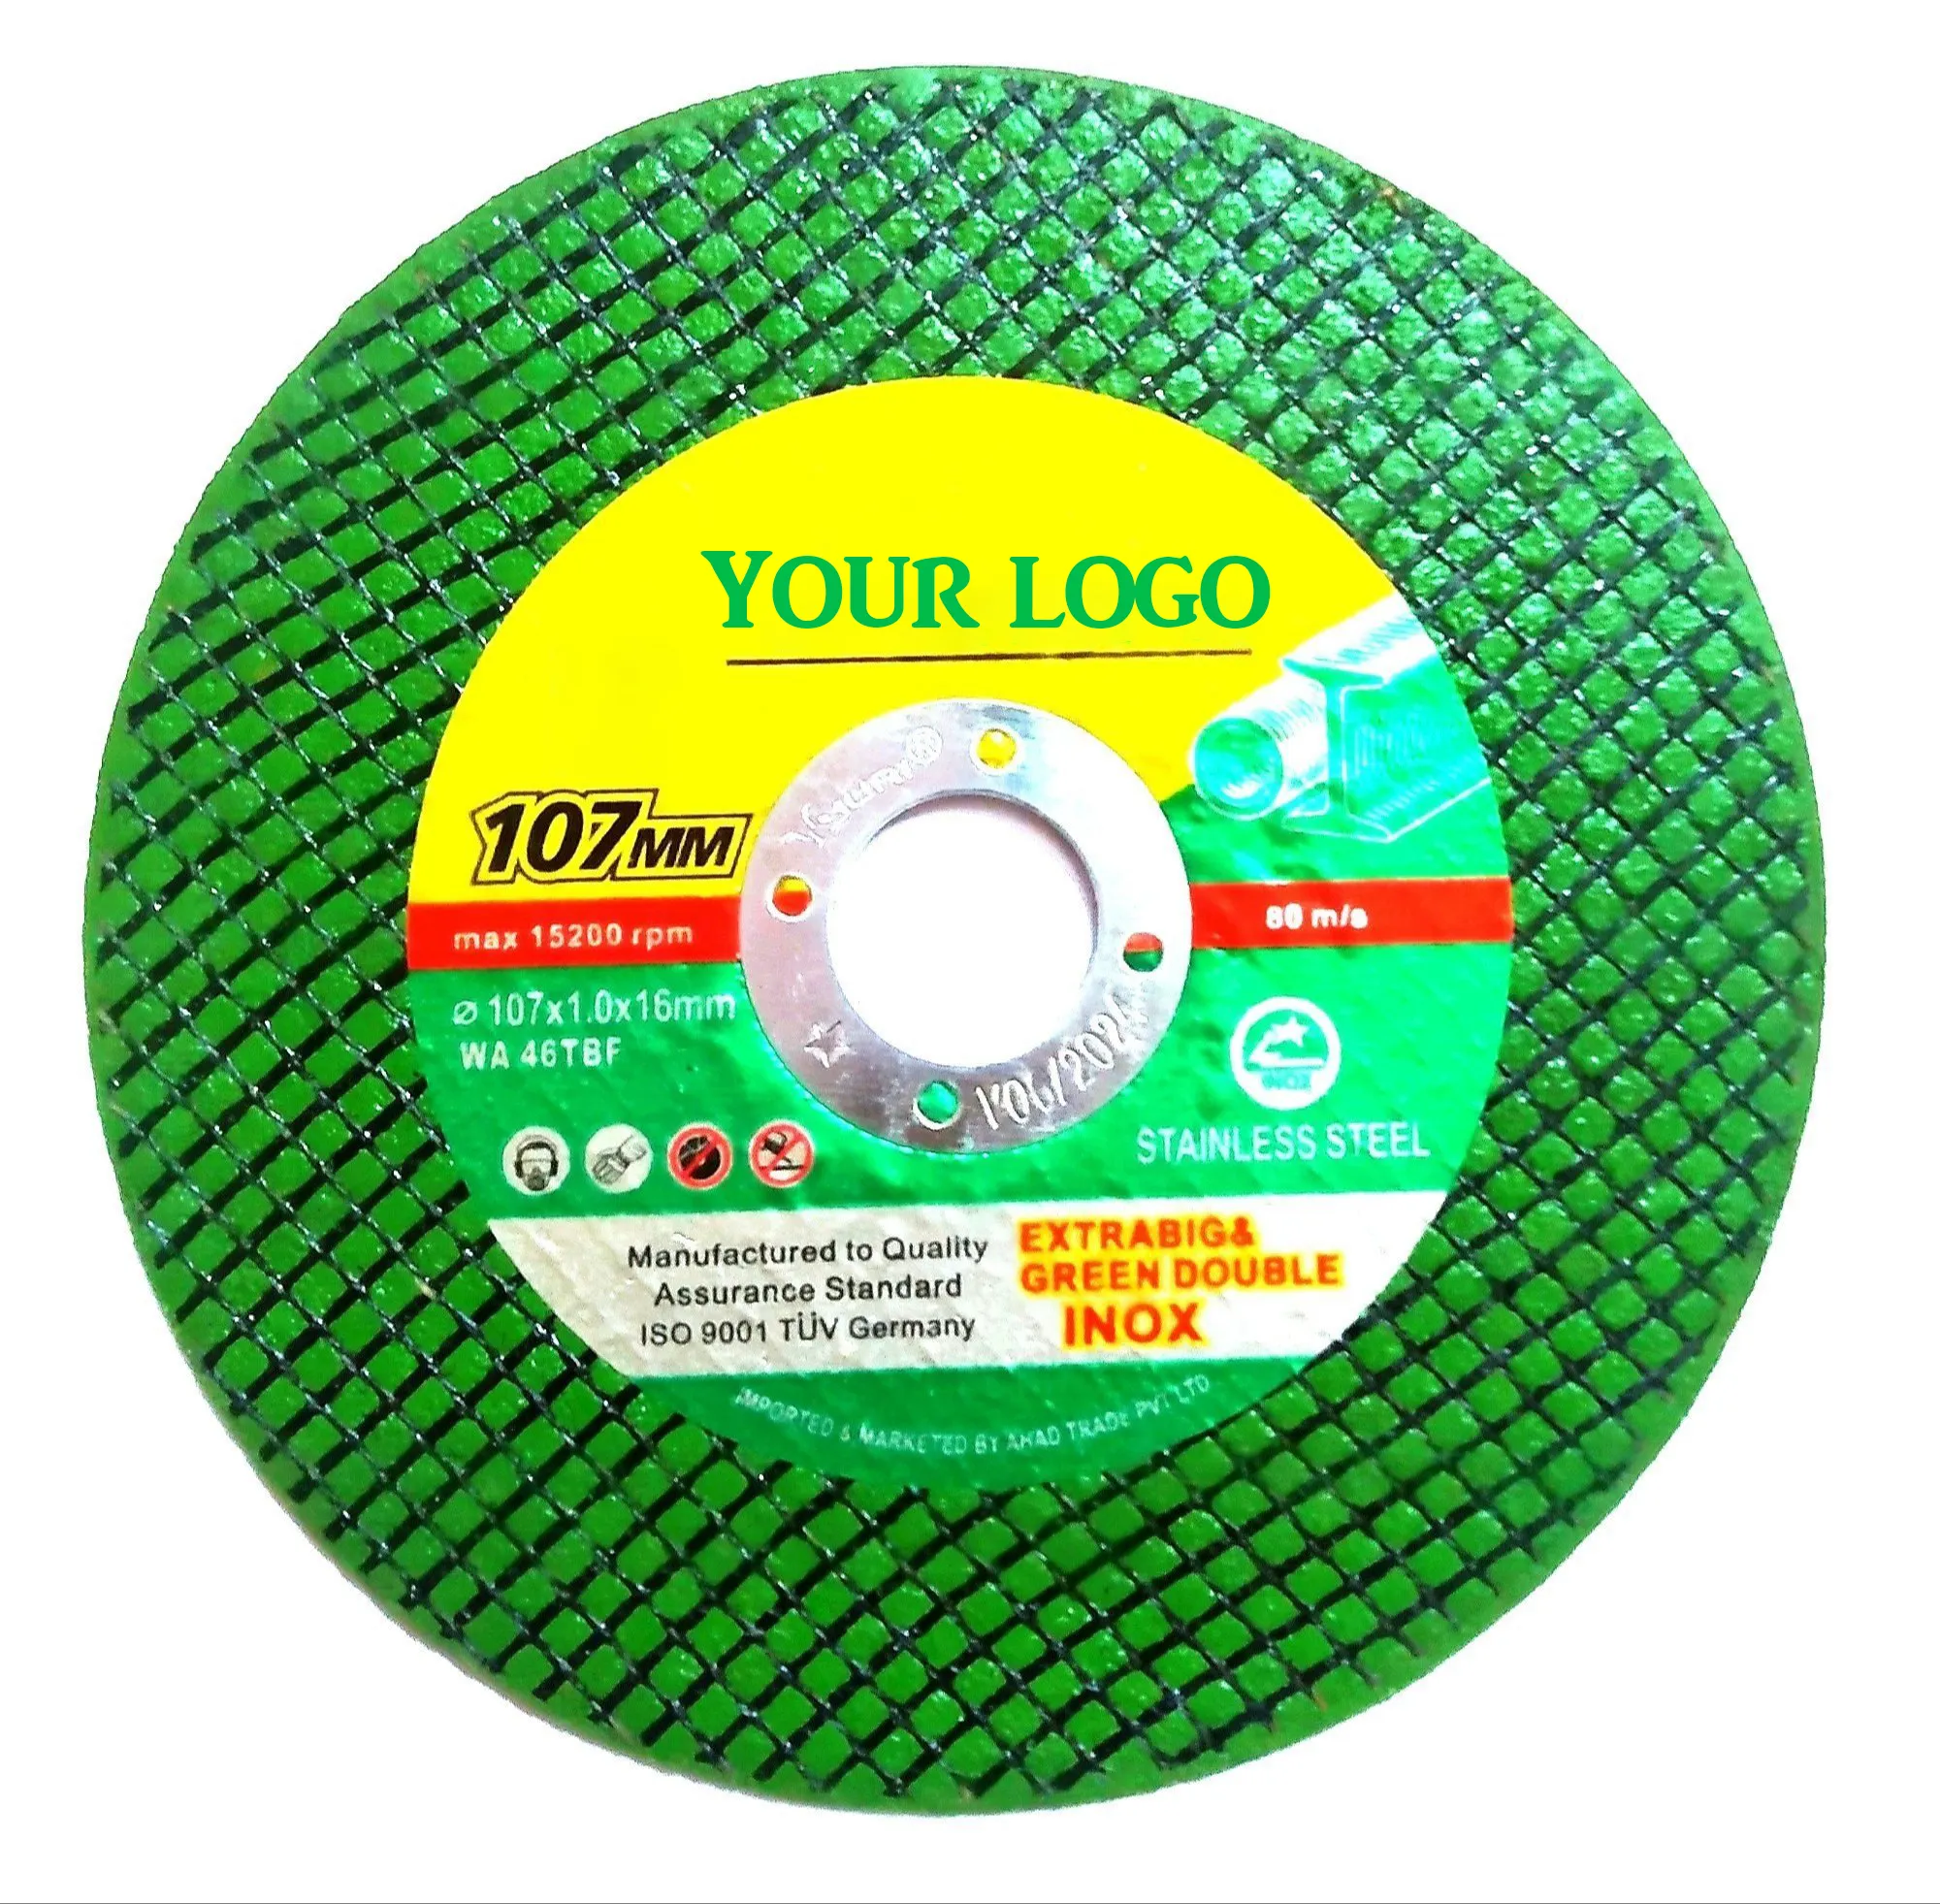 Super thin 2 nets green stainless steel iron inox 100 107mm Cutting disk cut off wheel 4inch Metal Cutting Discs for metal